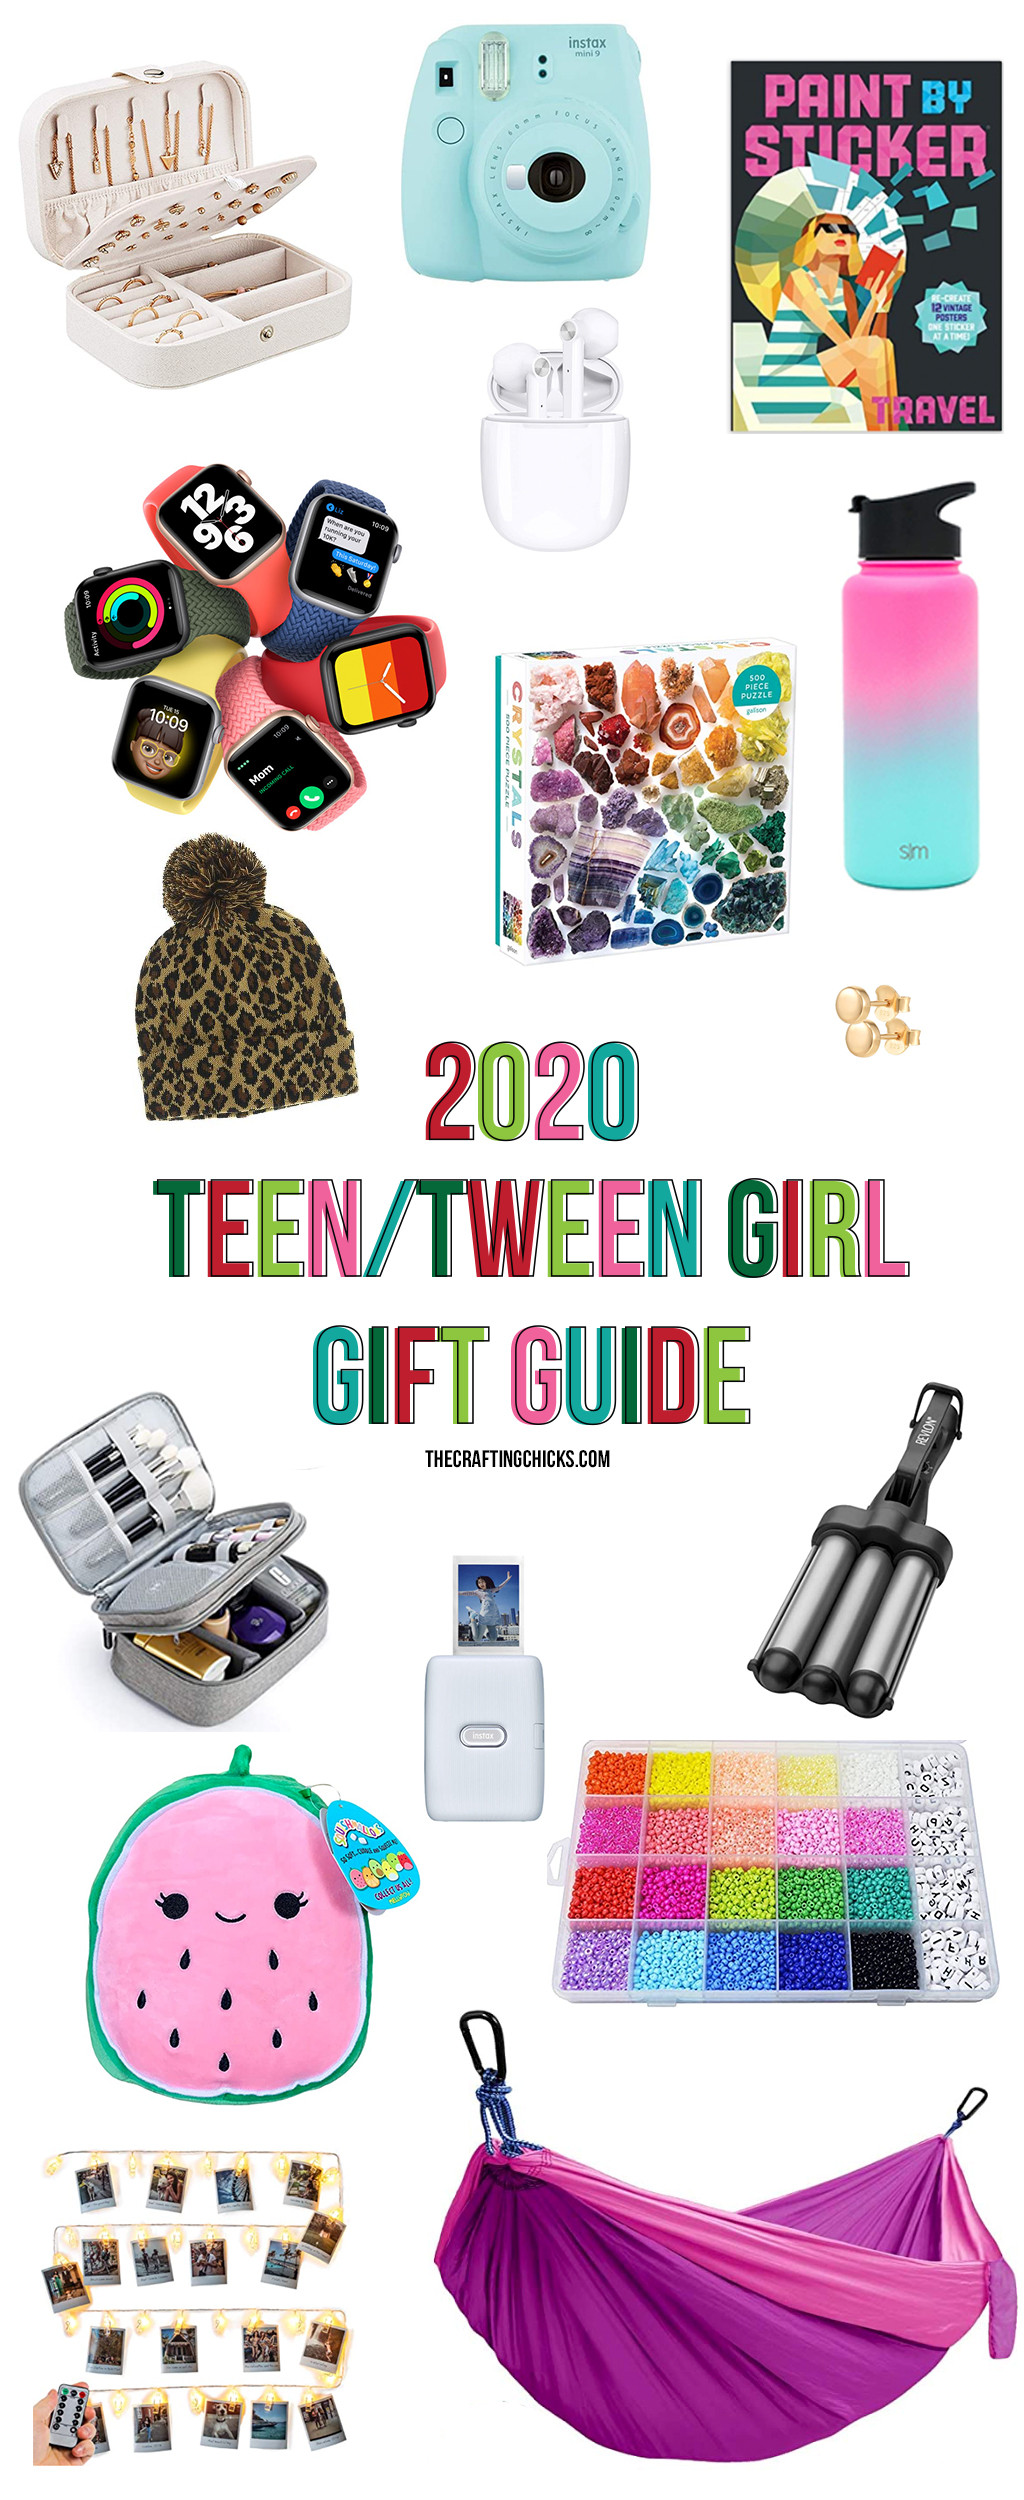 Teenager Gift Ideas For Girls
 2020 Gift Guide for Teen and Tween Girls The Crafting Chicks